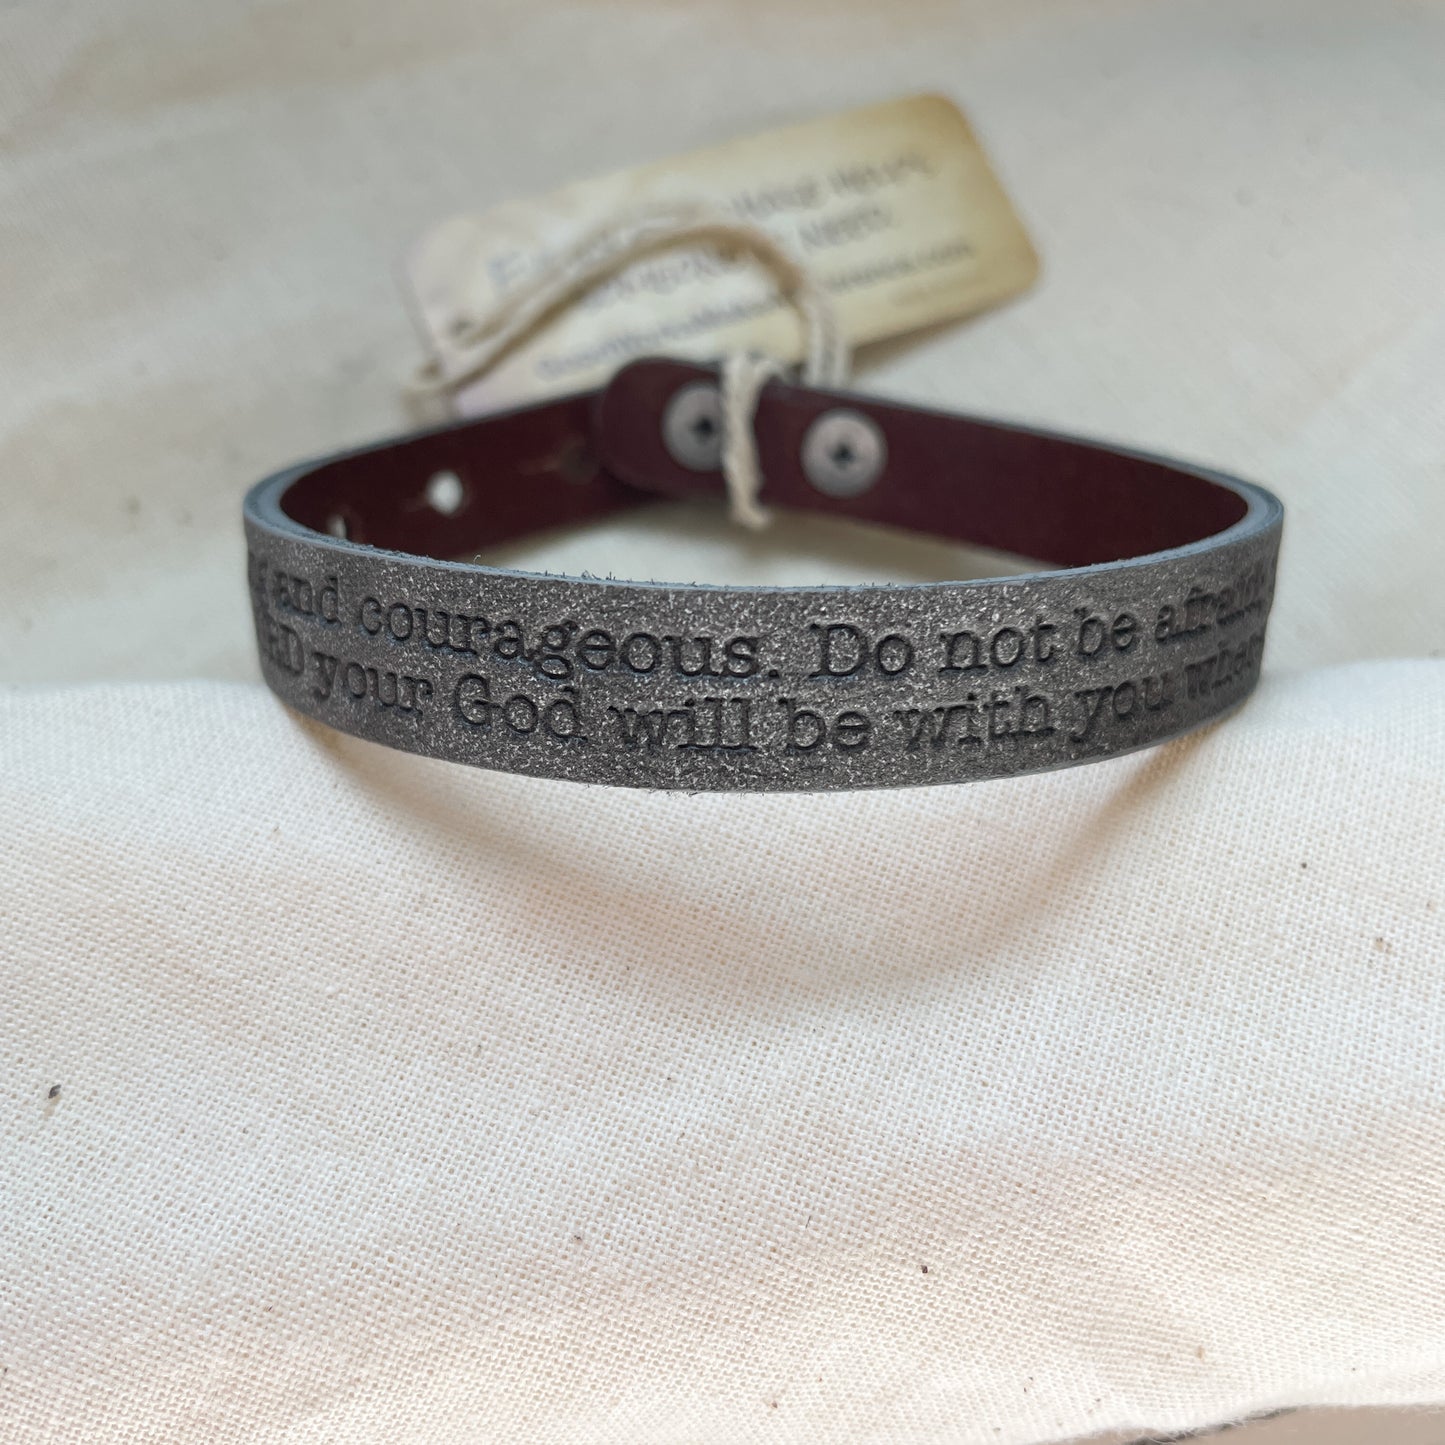 Leather Bracelet with scripture engraved. Joshua 1:9